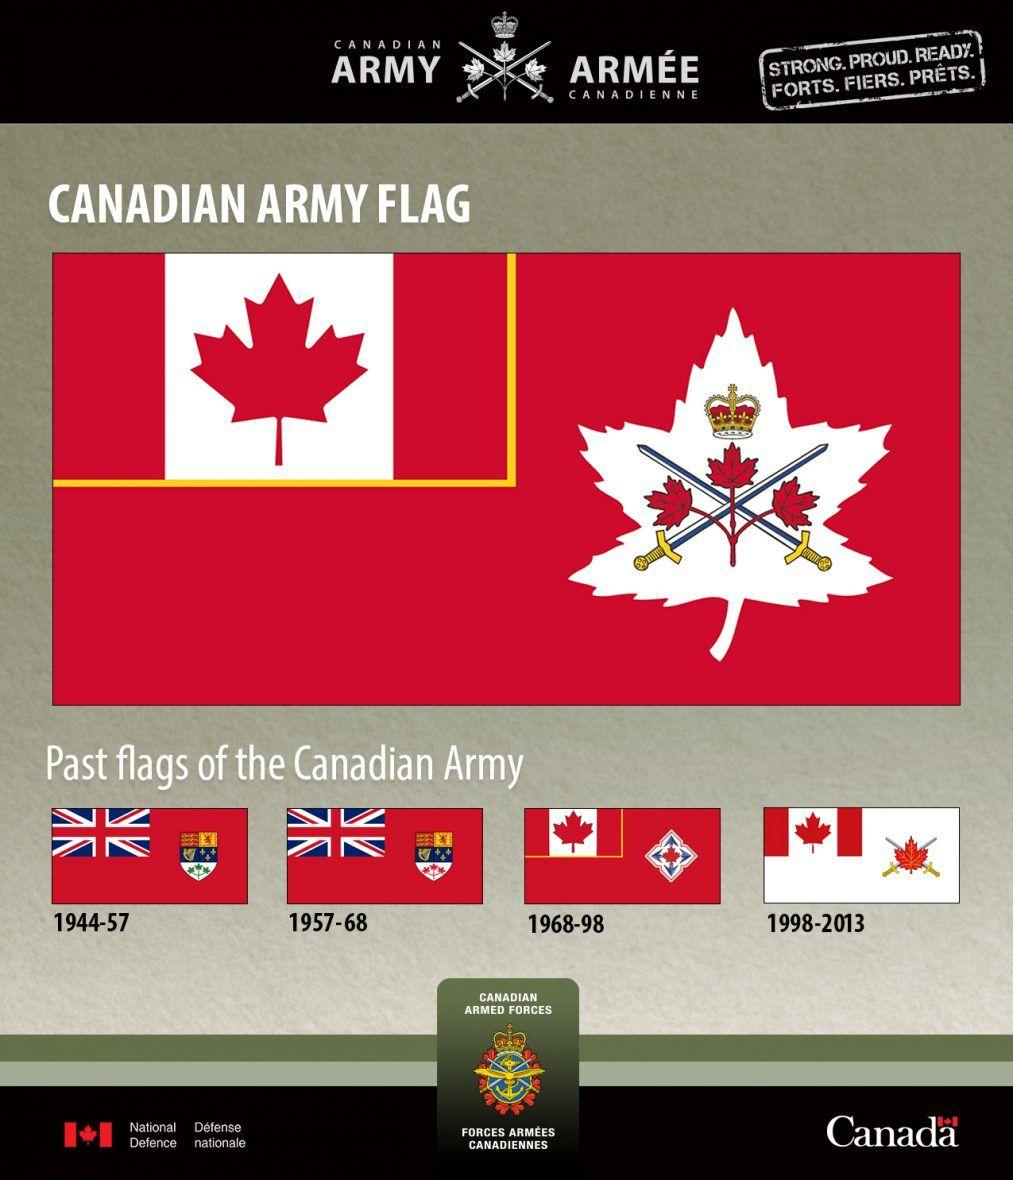 Red Canadian Leaf Logo - New Canadian Army flag unveiled